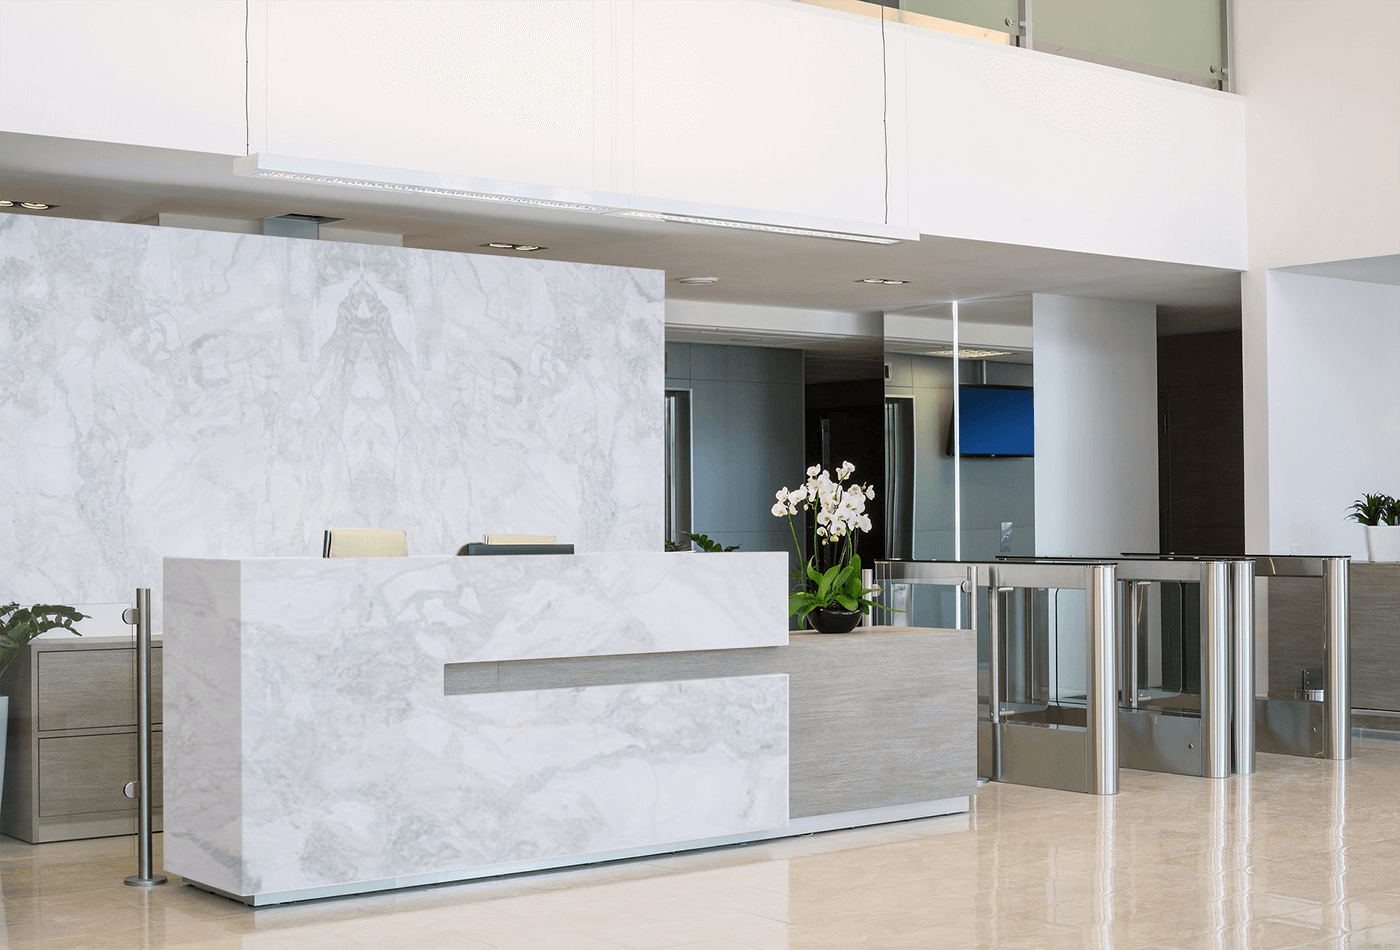 Spice Up the Reception Area by Embracing Alba Quartzite